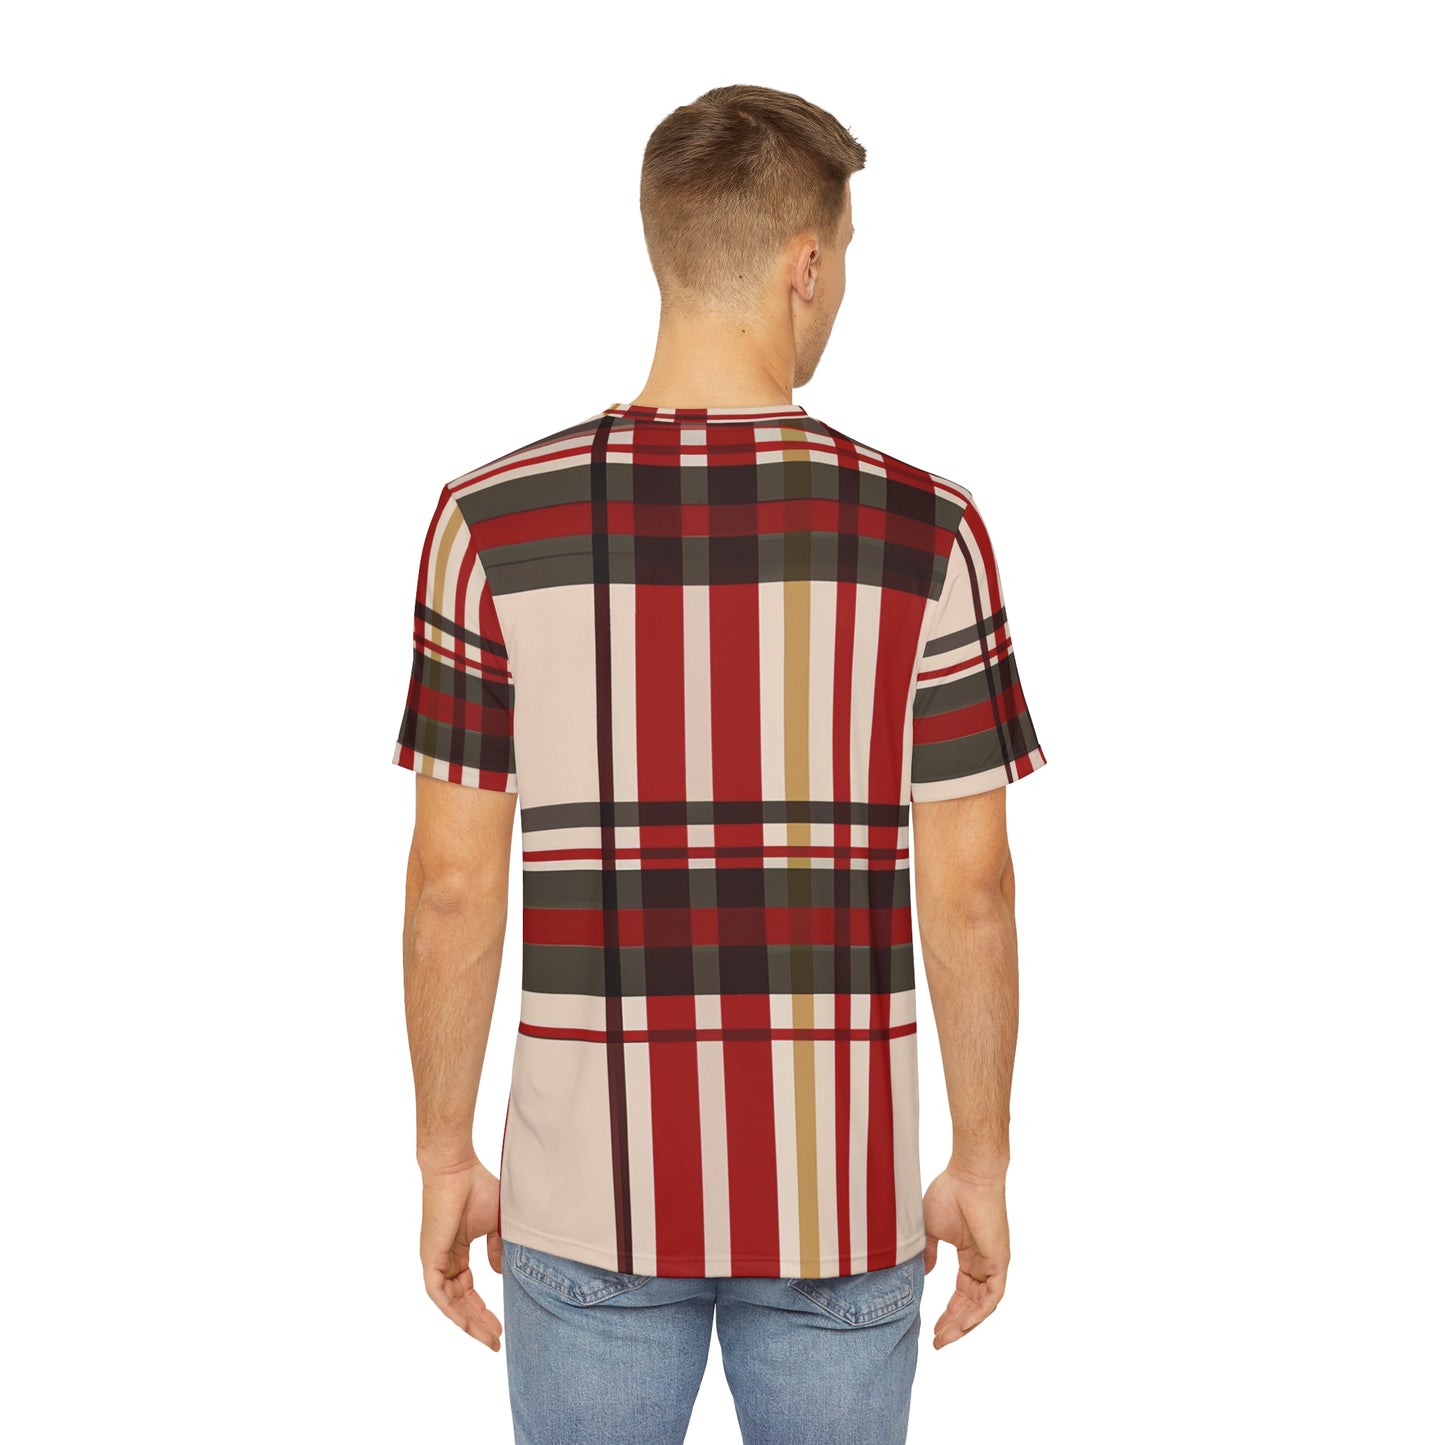 Back view of the Highland Ebony Ember Tartan Crewneck Pullover All-Over Print Short-Sleeved Shirt white black yellow plaid pattern paired with casual denim pants worn by a white man